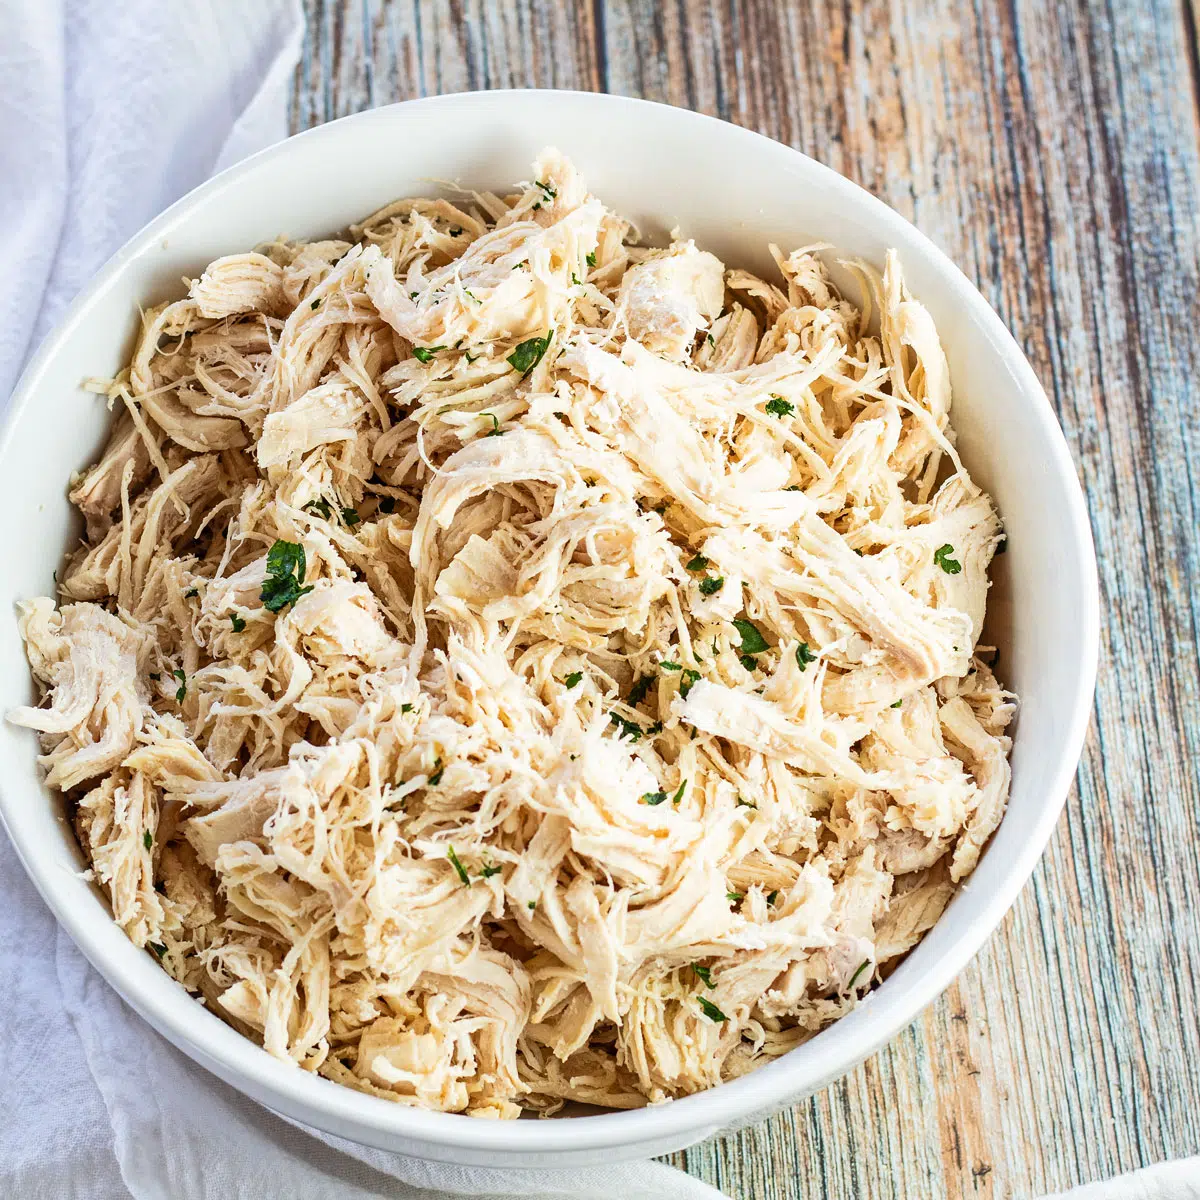 Best Instant Pot shredded chicken served in white bowl with parsley garnish on wooden background.